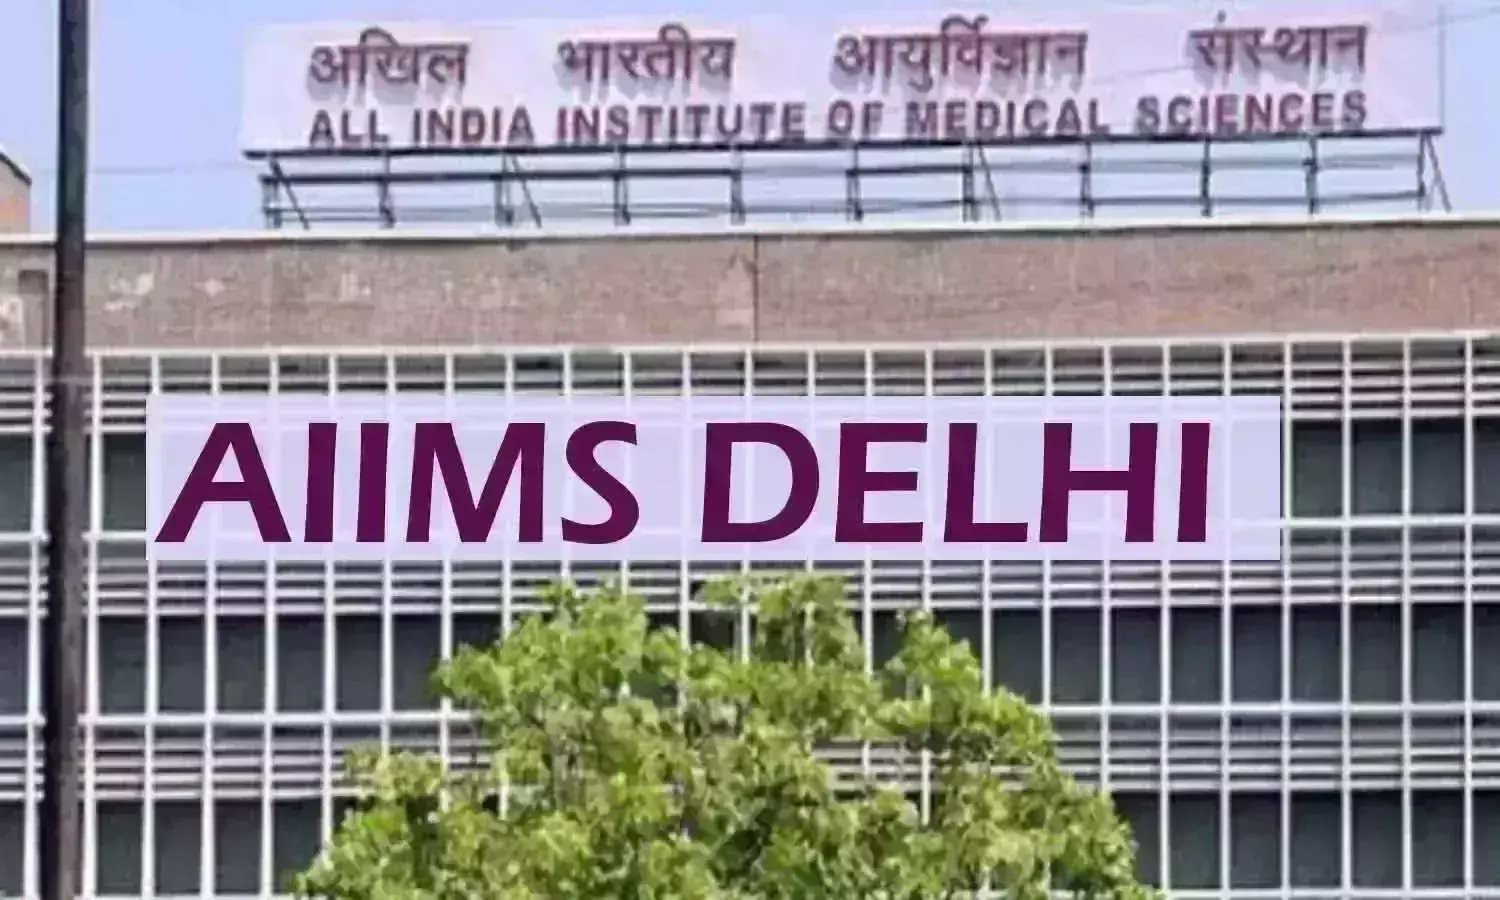 AIIMS Delhi: 3000-bed hospital to come up soon under campus master plan